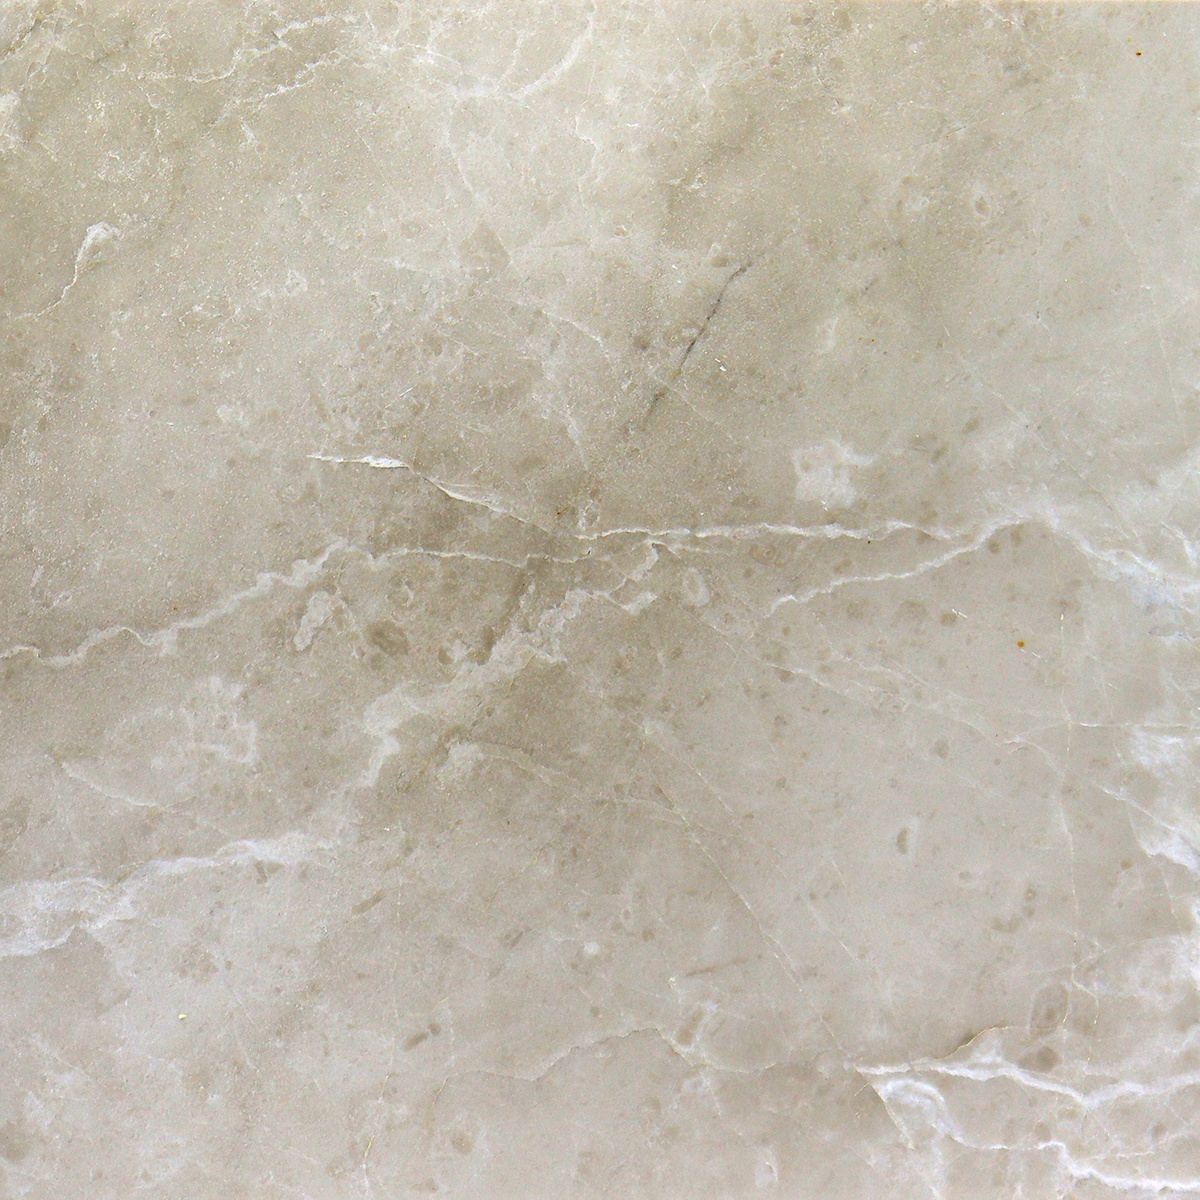 static/products/marbleSlabs/products/MBR20.jpg 